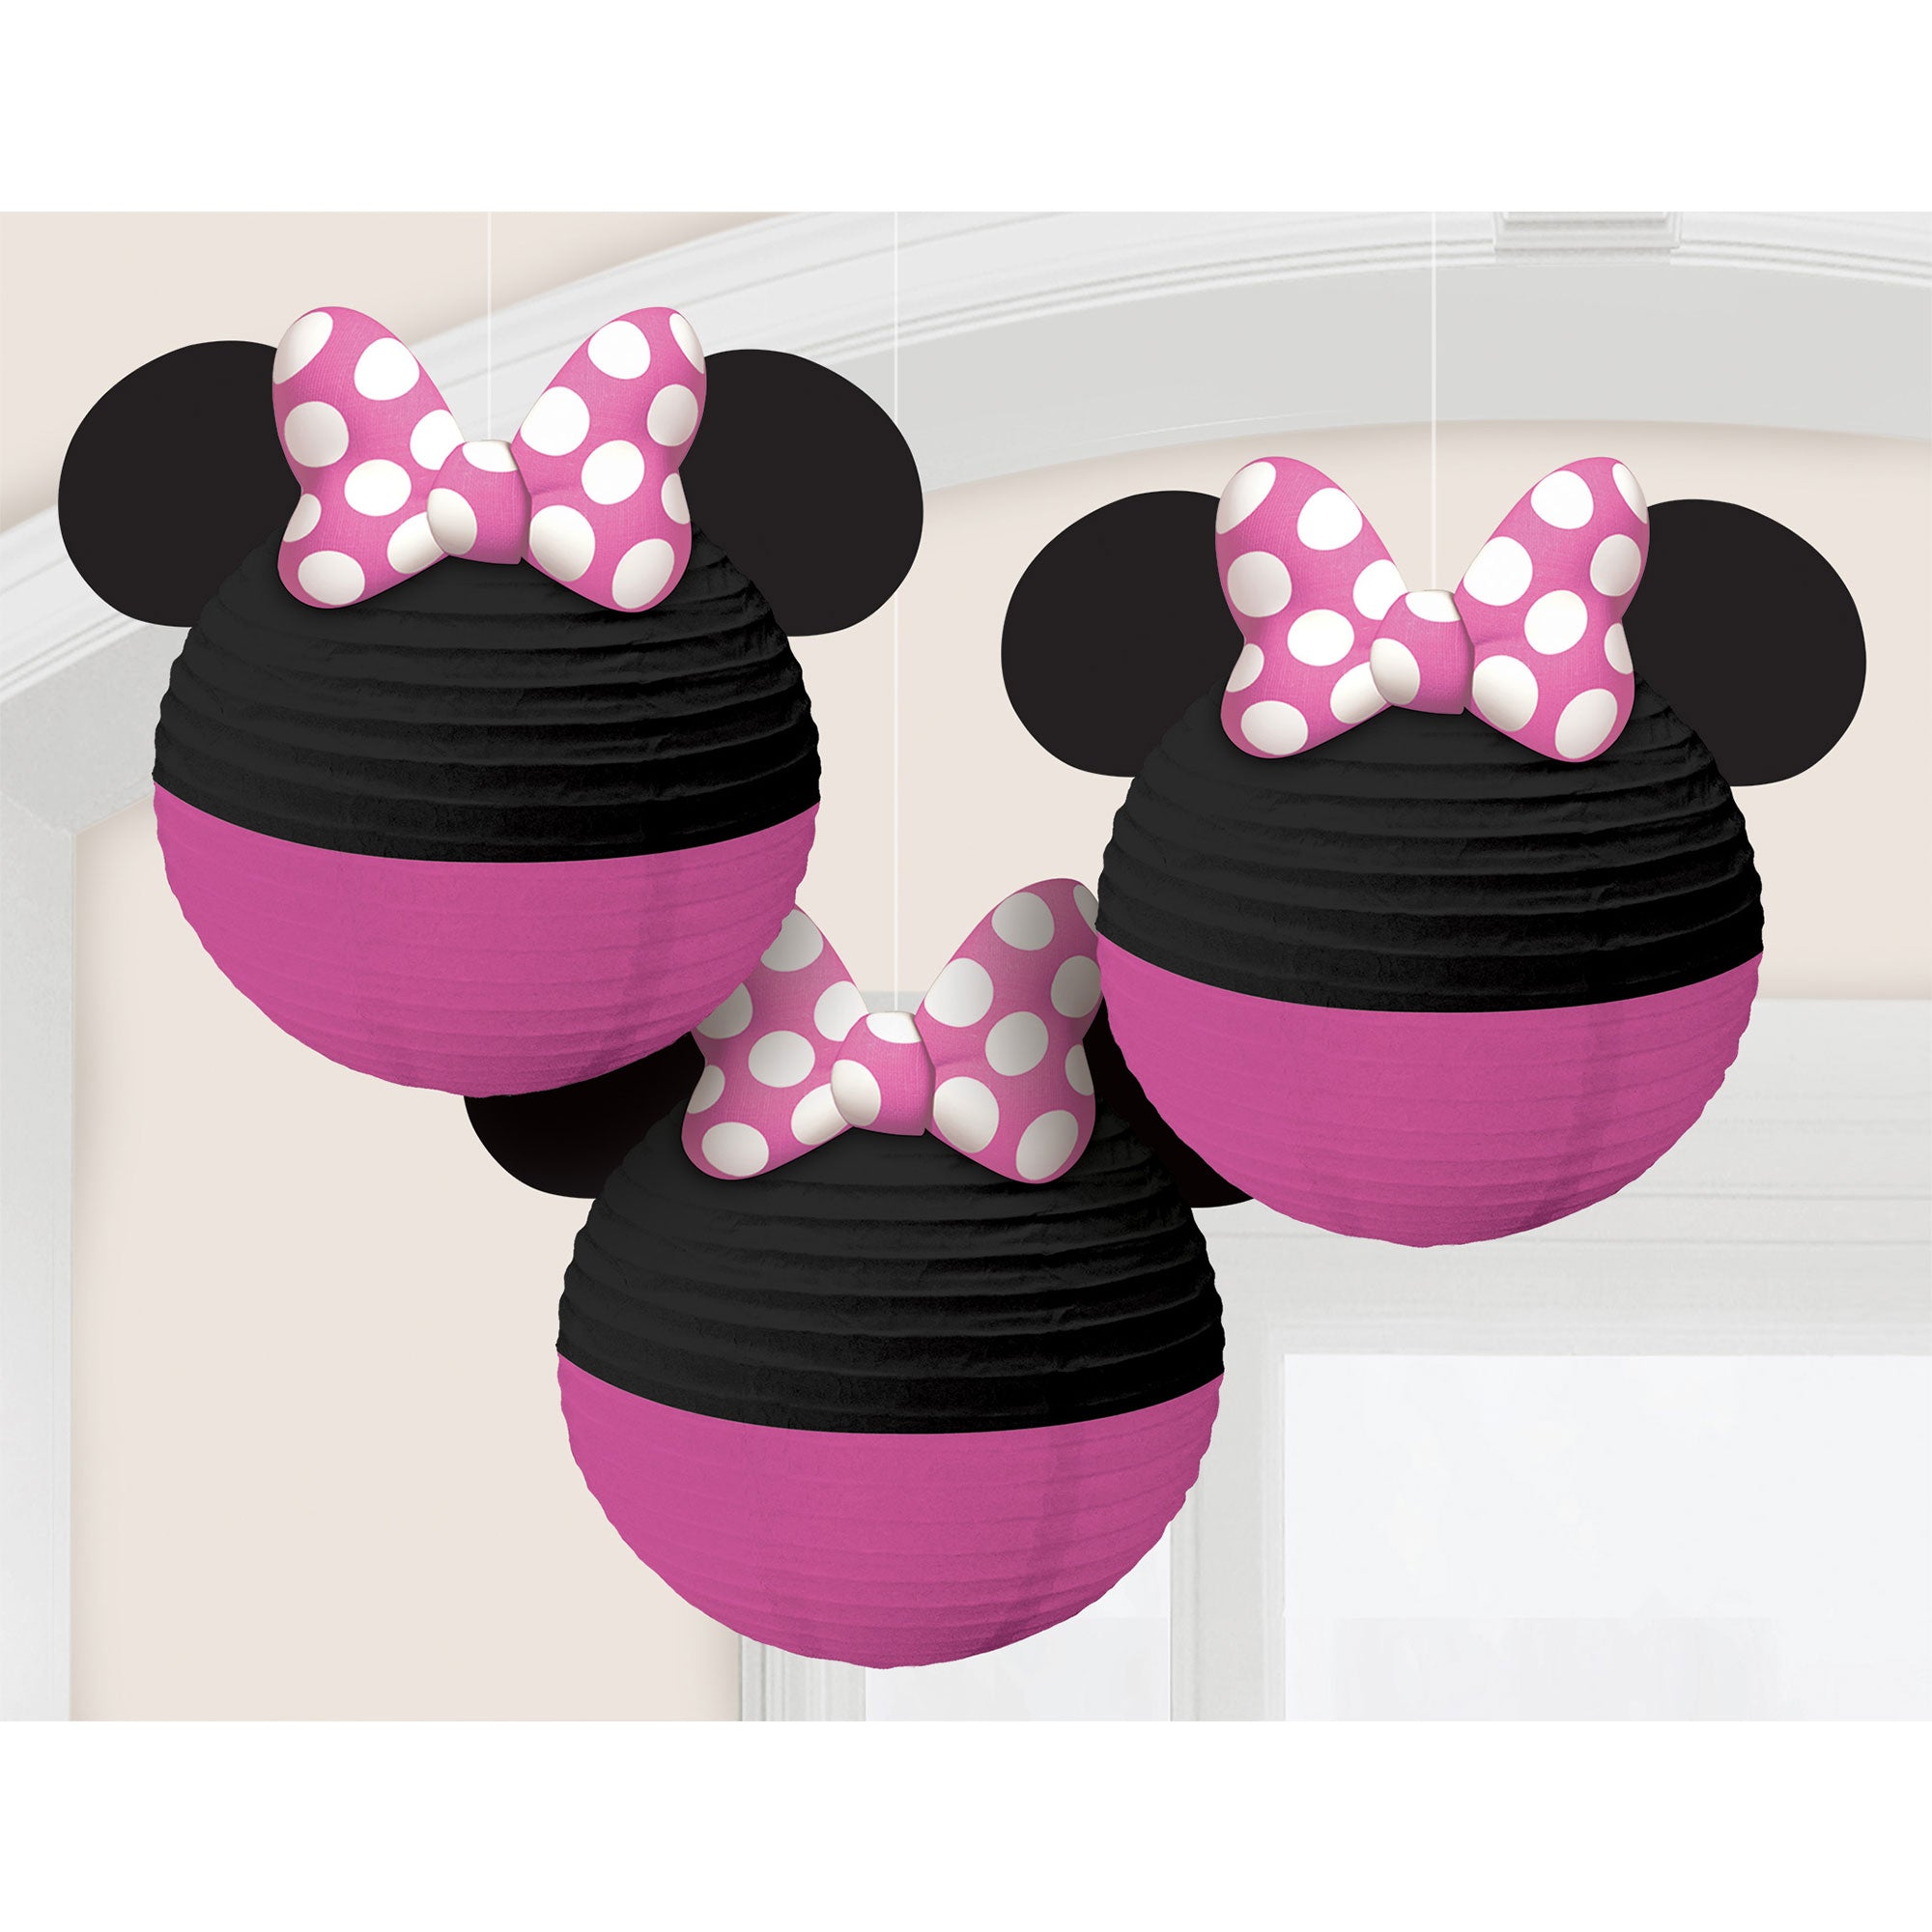 Minnie Mouse Forever Paper Lanterns with Bows and Ears - 24cm 3 Pack Default Title